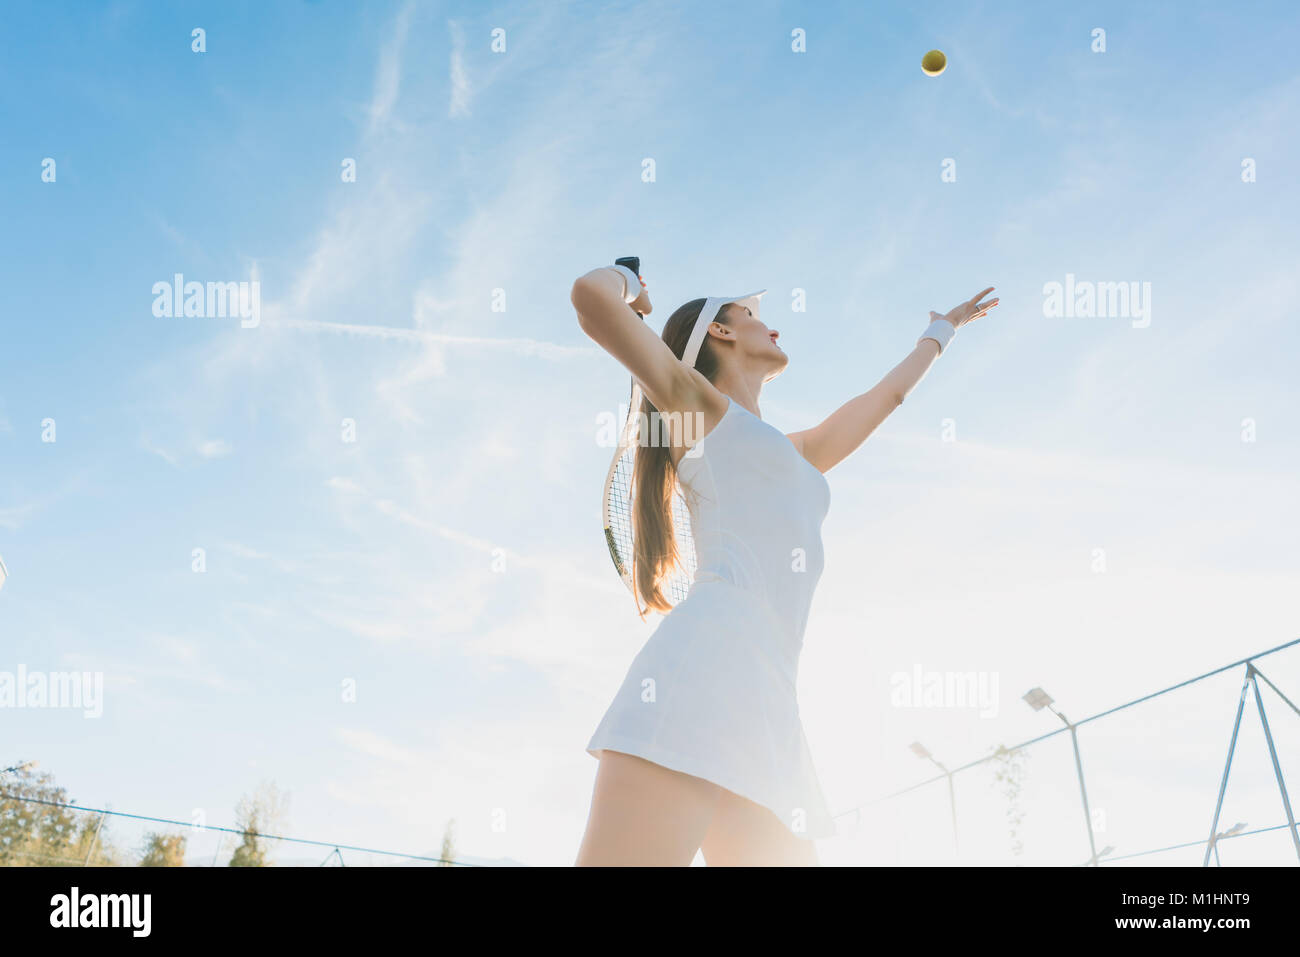 Woman serving the ball for a game of tennis Stock Photo